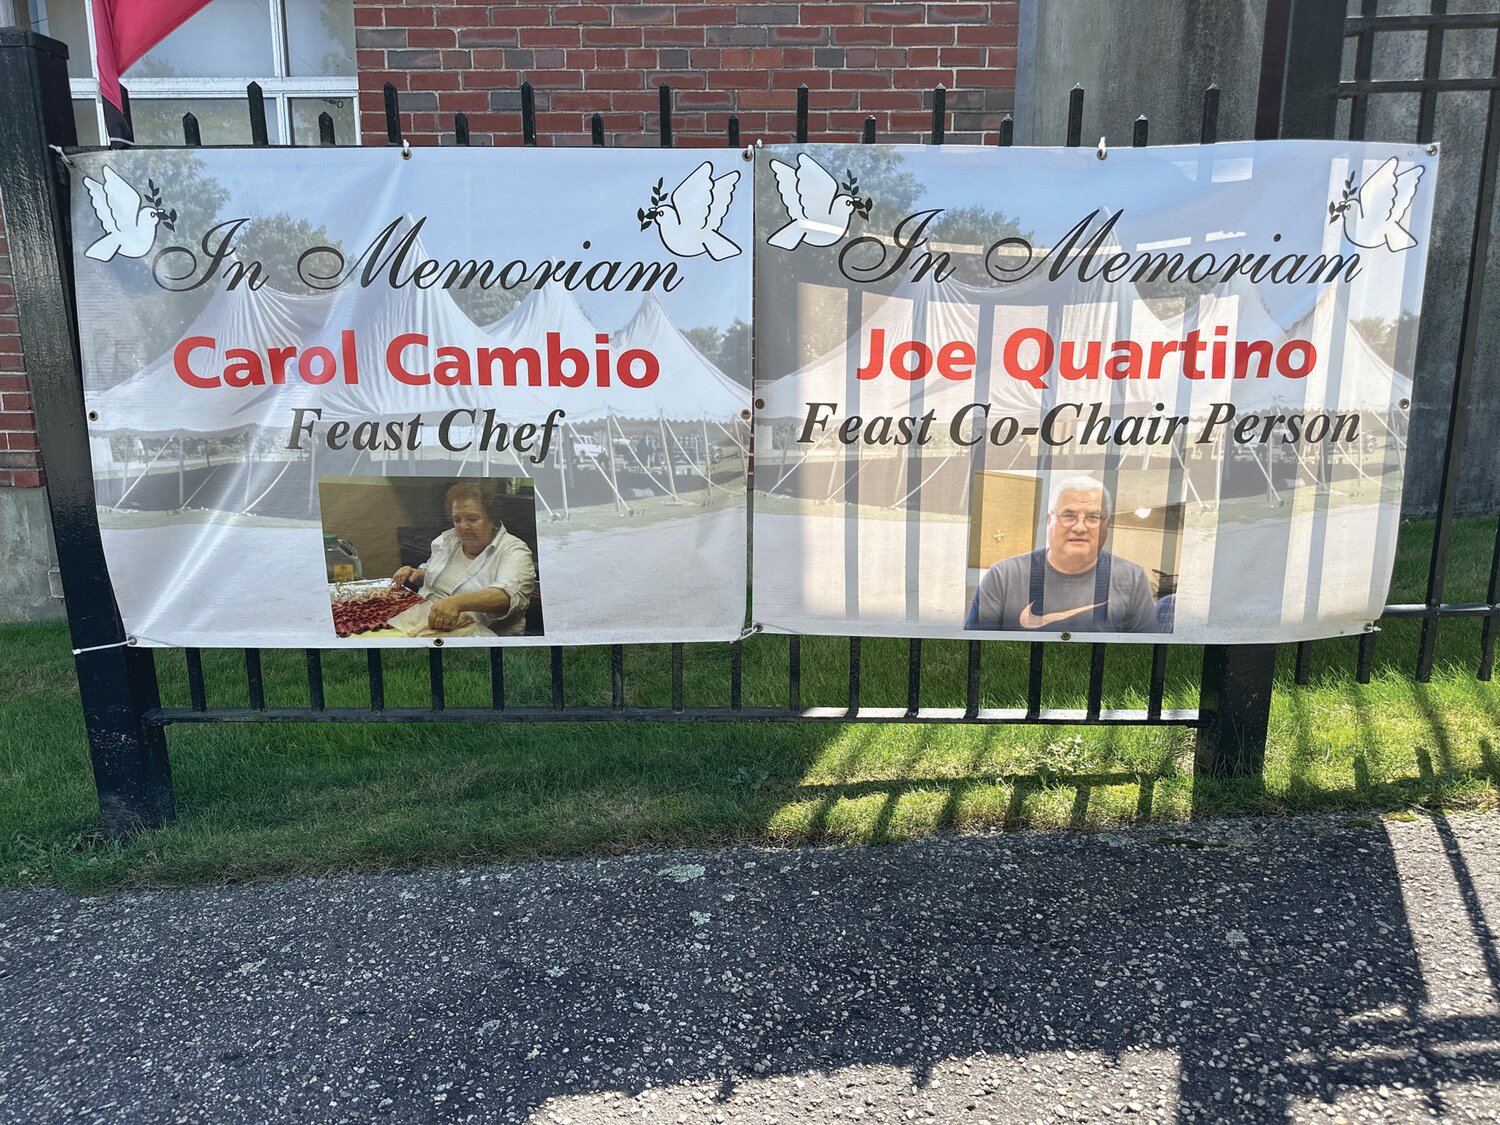 MIGHTY MEMORIALS: These are two of the impressive banners festival-goers will see that remember and salute the last Co-Chairman Joe Quartino and Chef Carol Cambio.